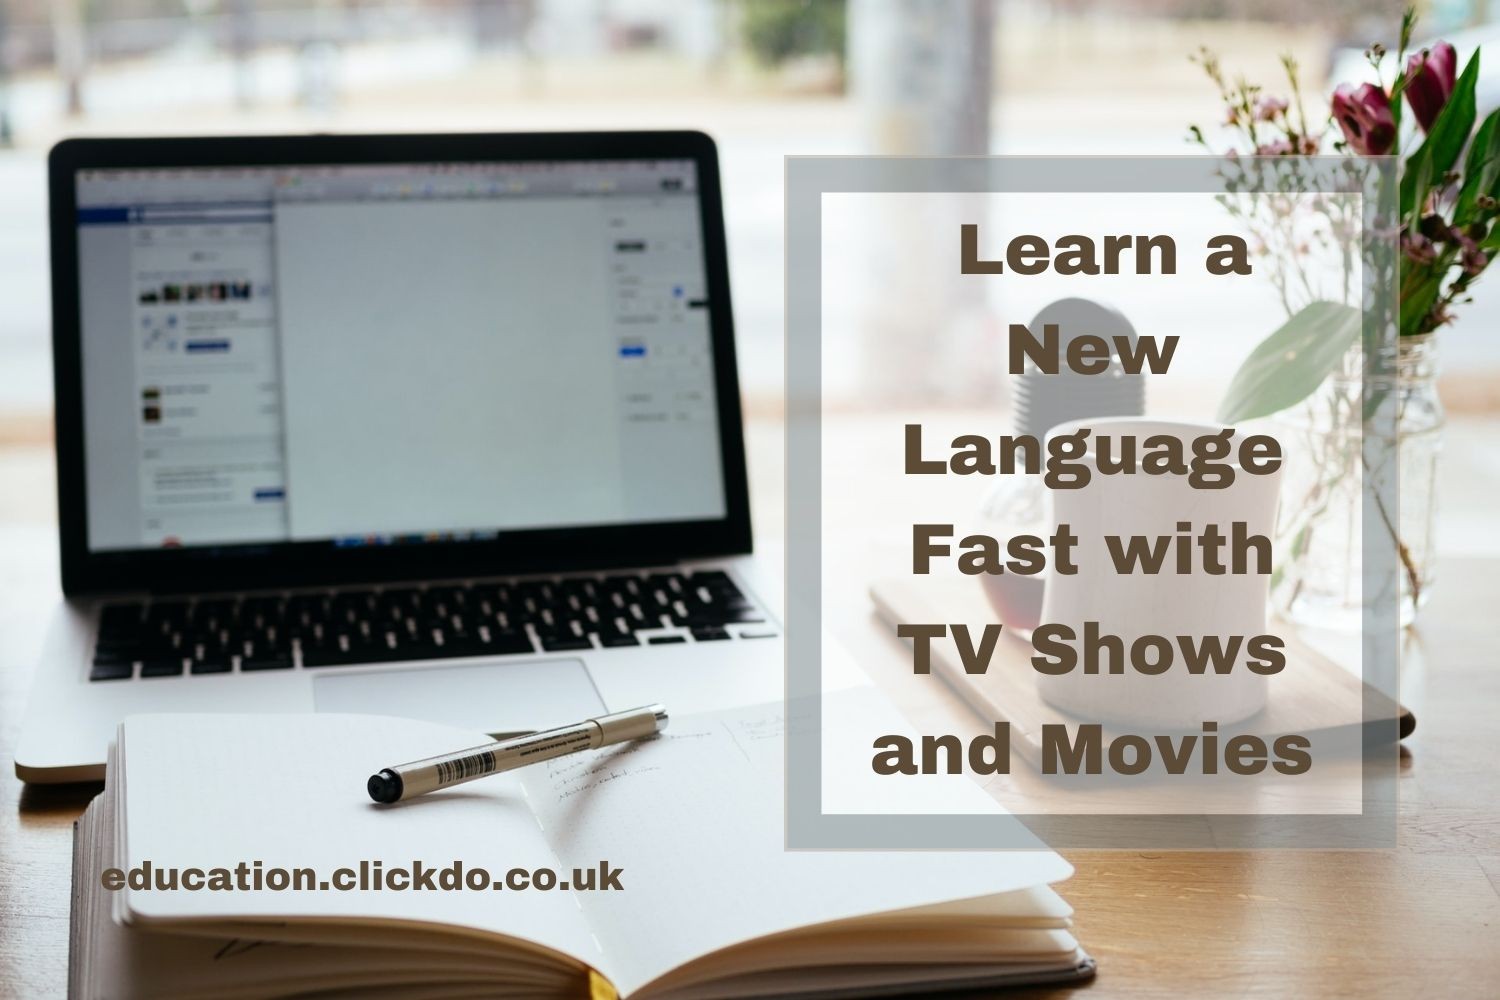 _Learn a New Language Fast with TV Shows and Movies